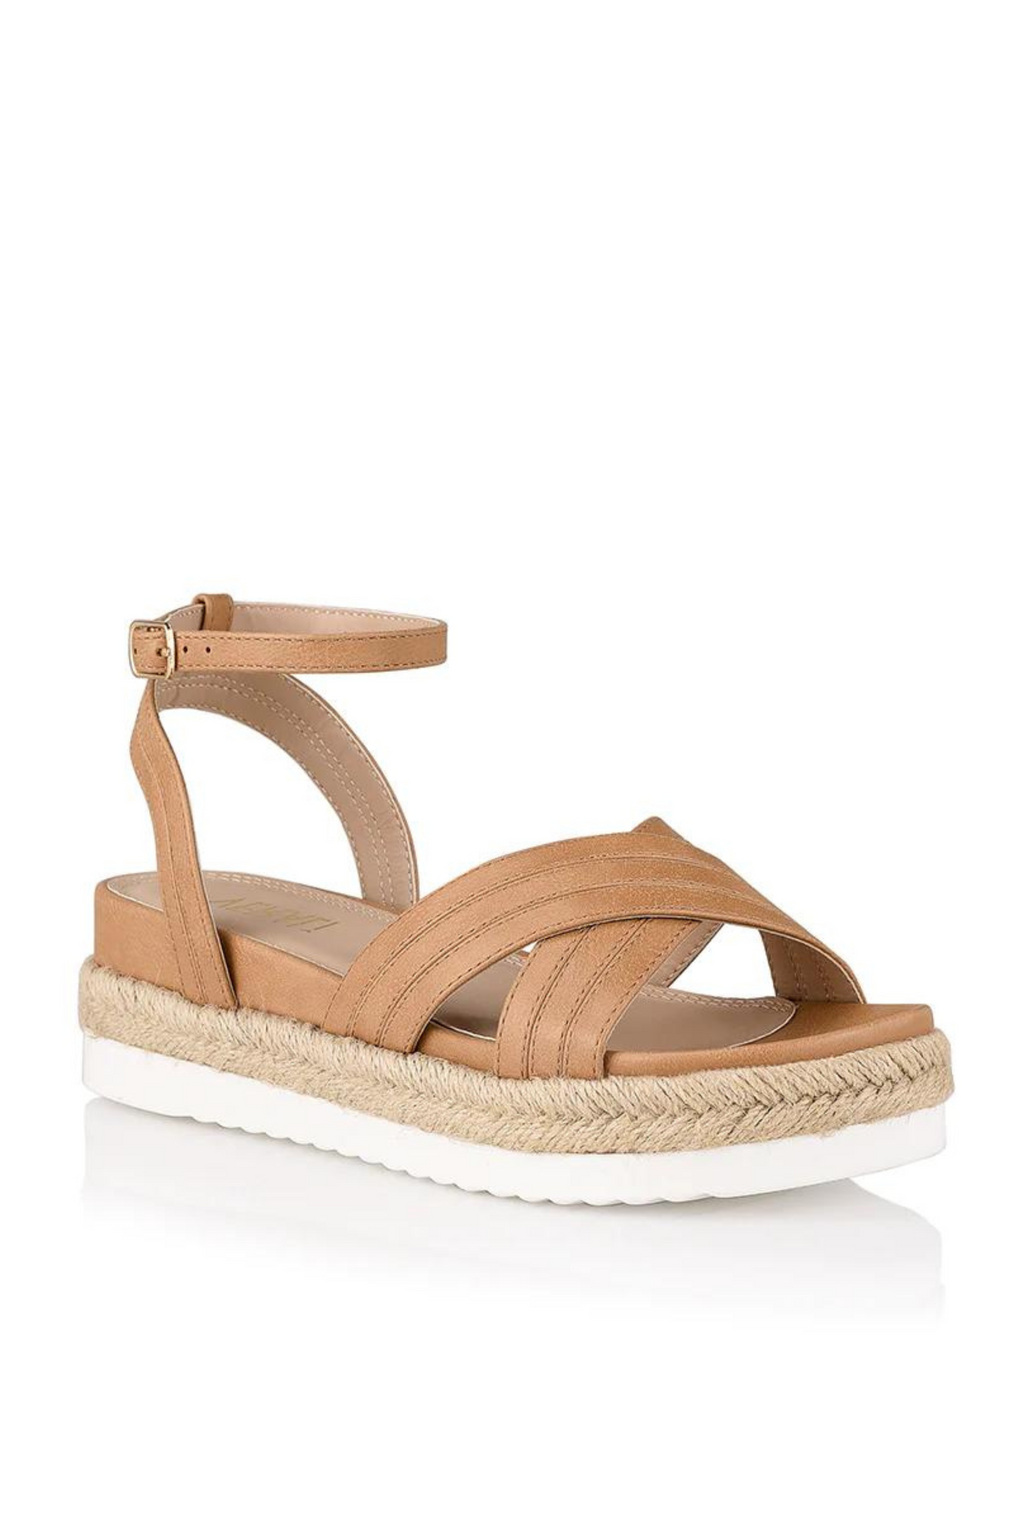 DEZZIE FOOTBED SANDALS - Caramel Softee